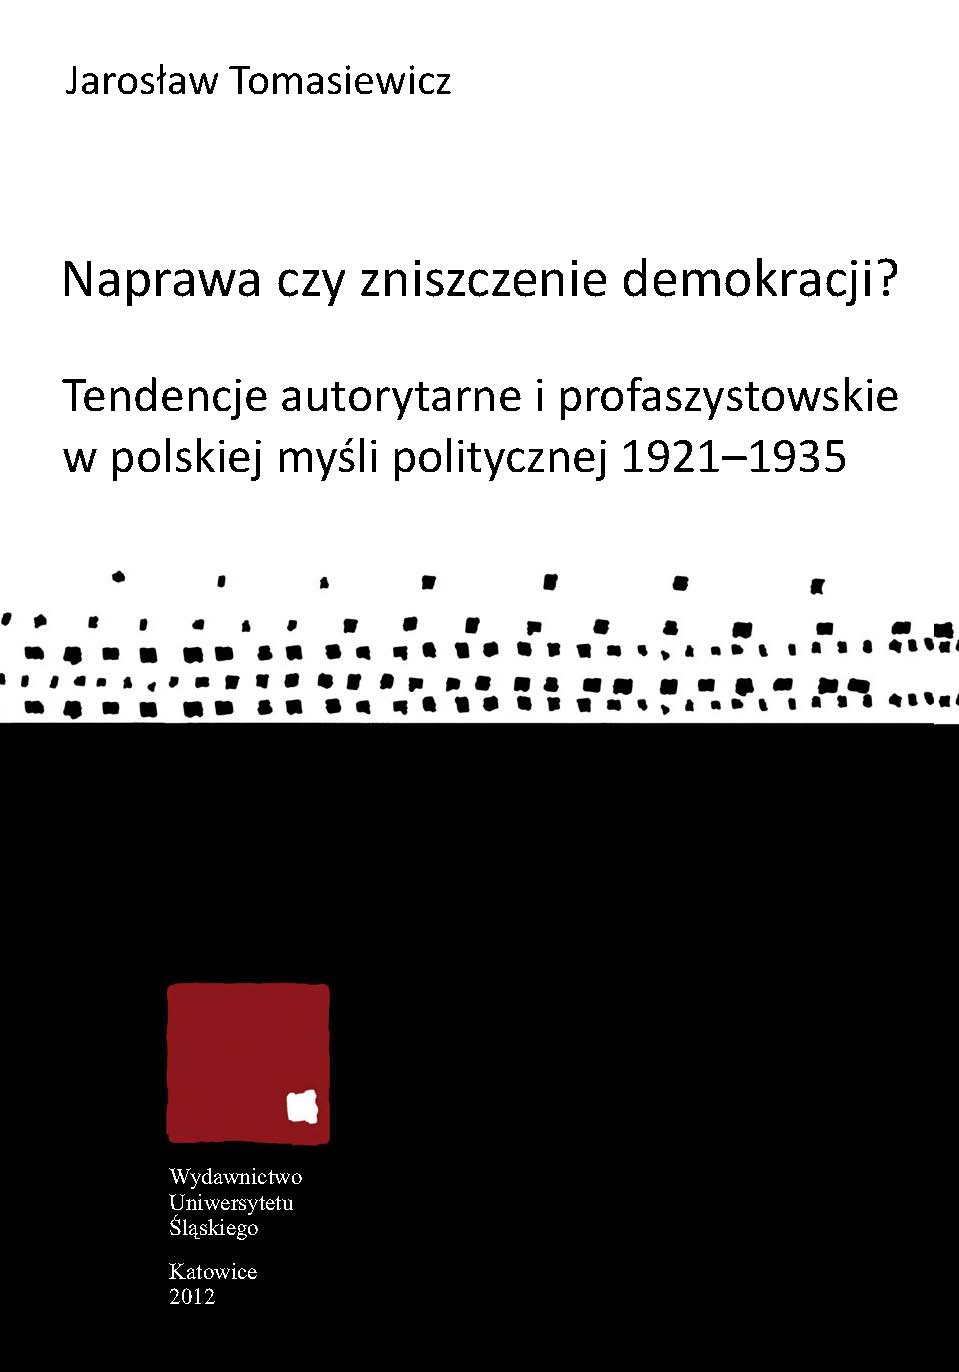 Restoration or distortion of democracy? Authoritarian and pro-fascist tendencies in the Polish political thought between 1921 and 1935 Cover Image